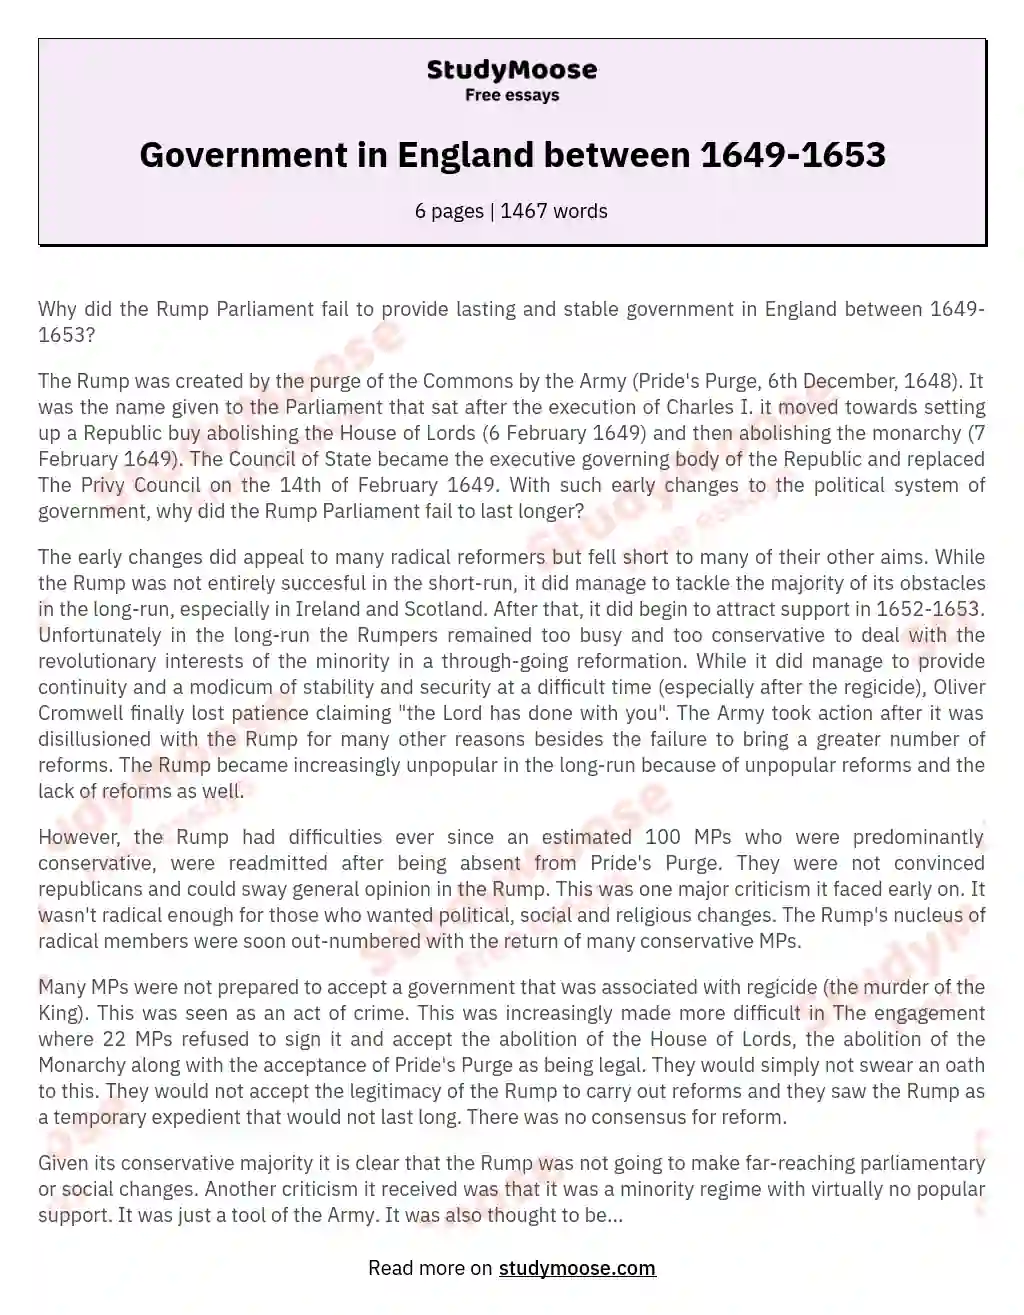 Government in England between 1649-1653 essay